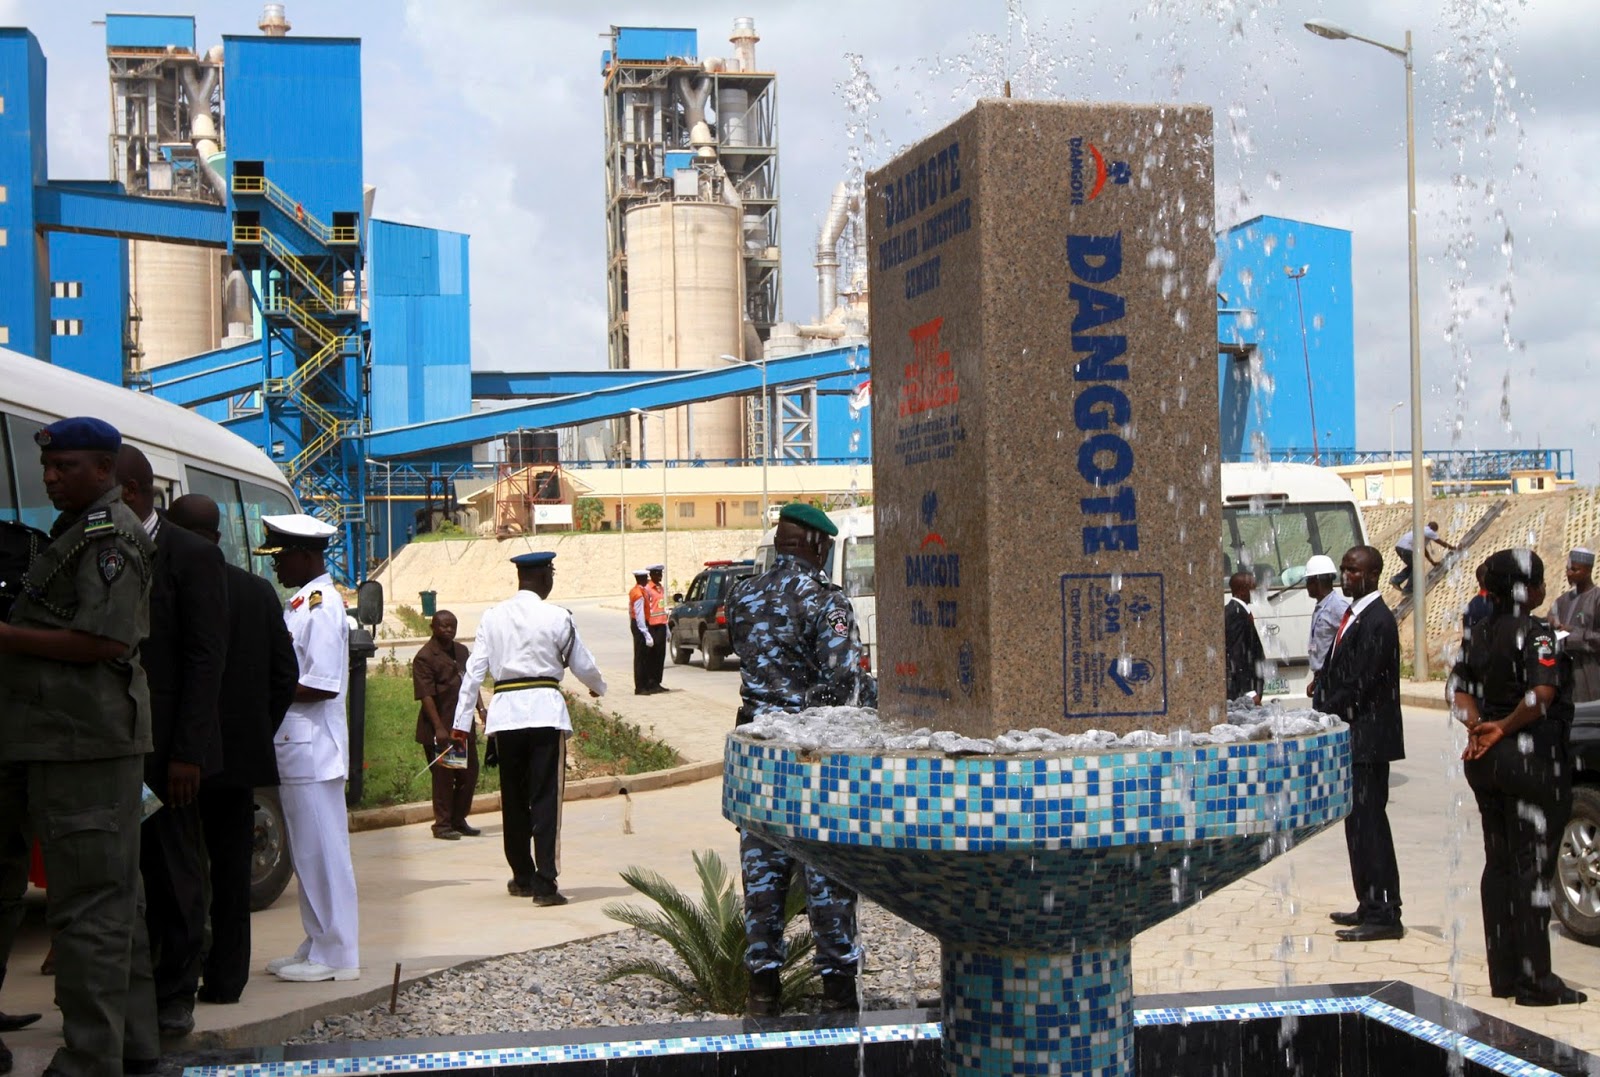 DANGOTE CEMENT TO START USING ITS OWN GAS-POWERED PLANT IN TANZANIA